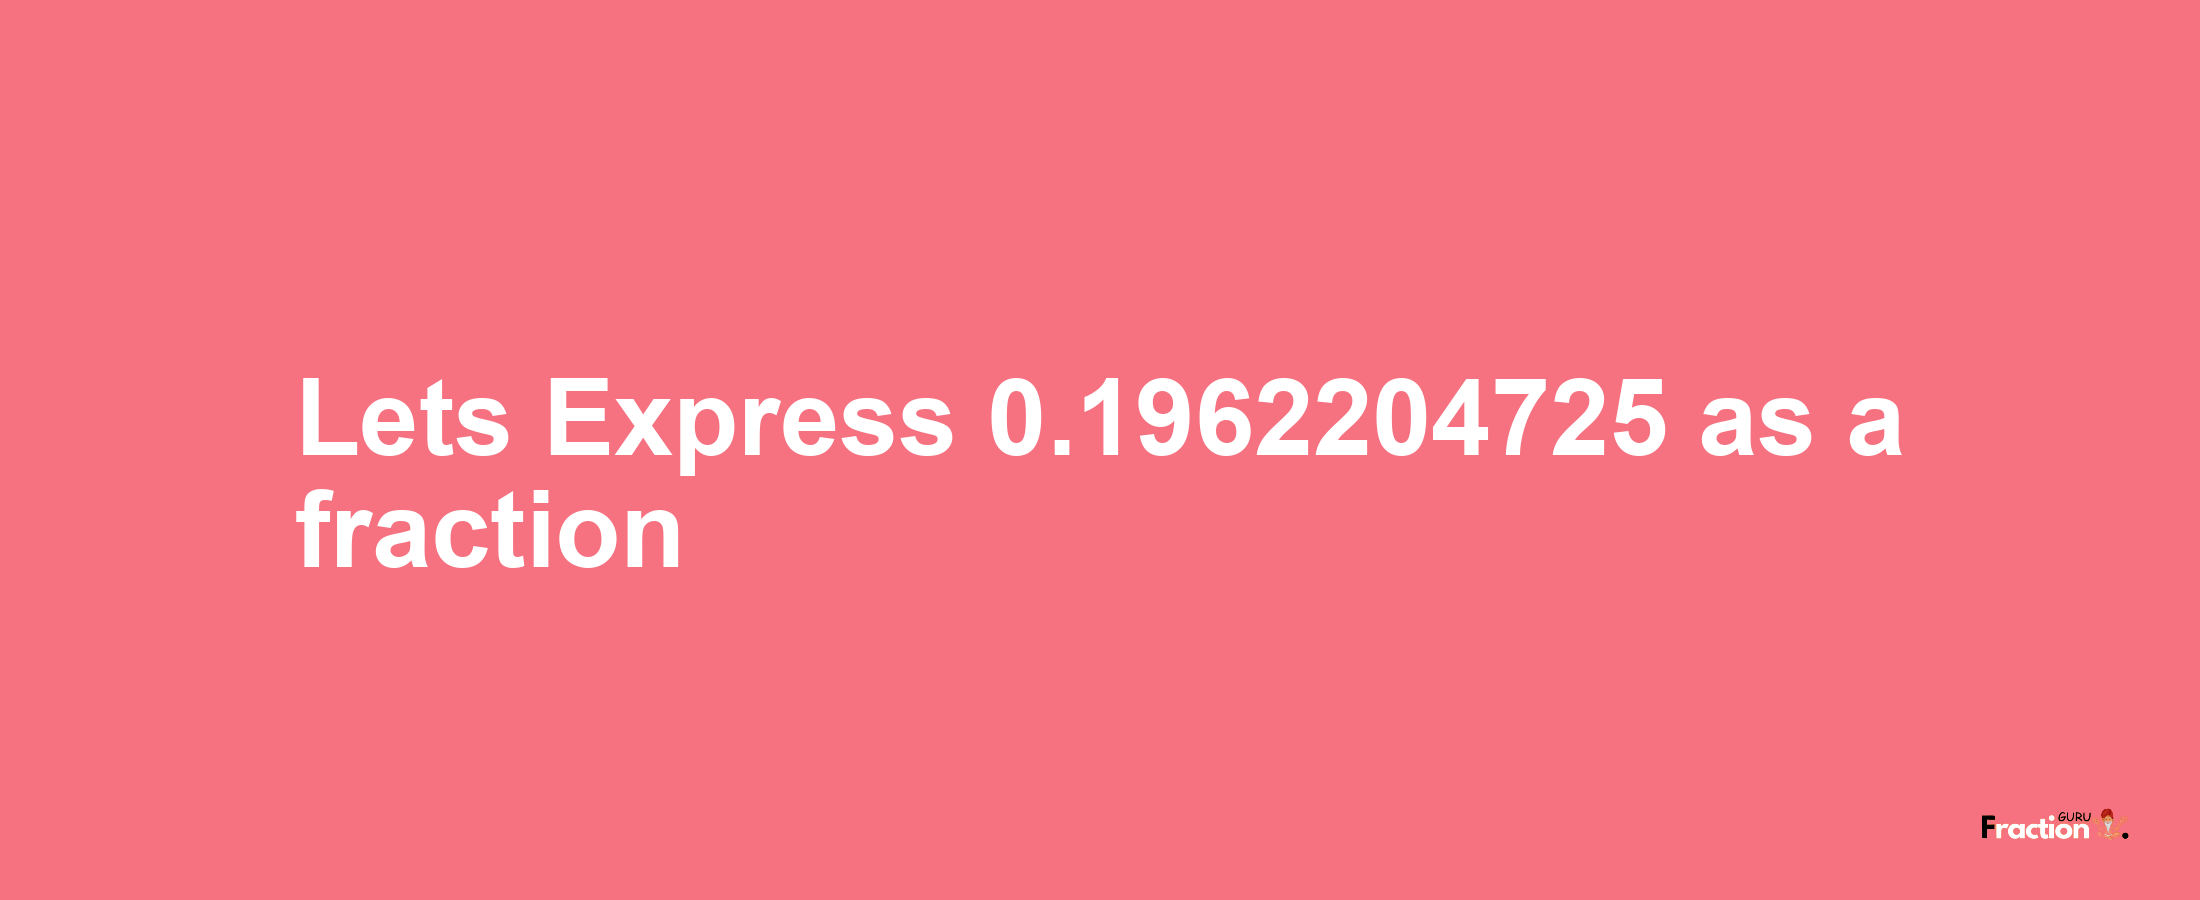 Lets Express 0.1962204725 as afraction